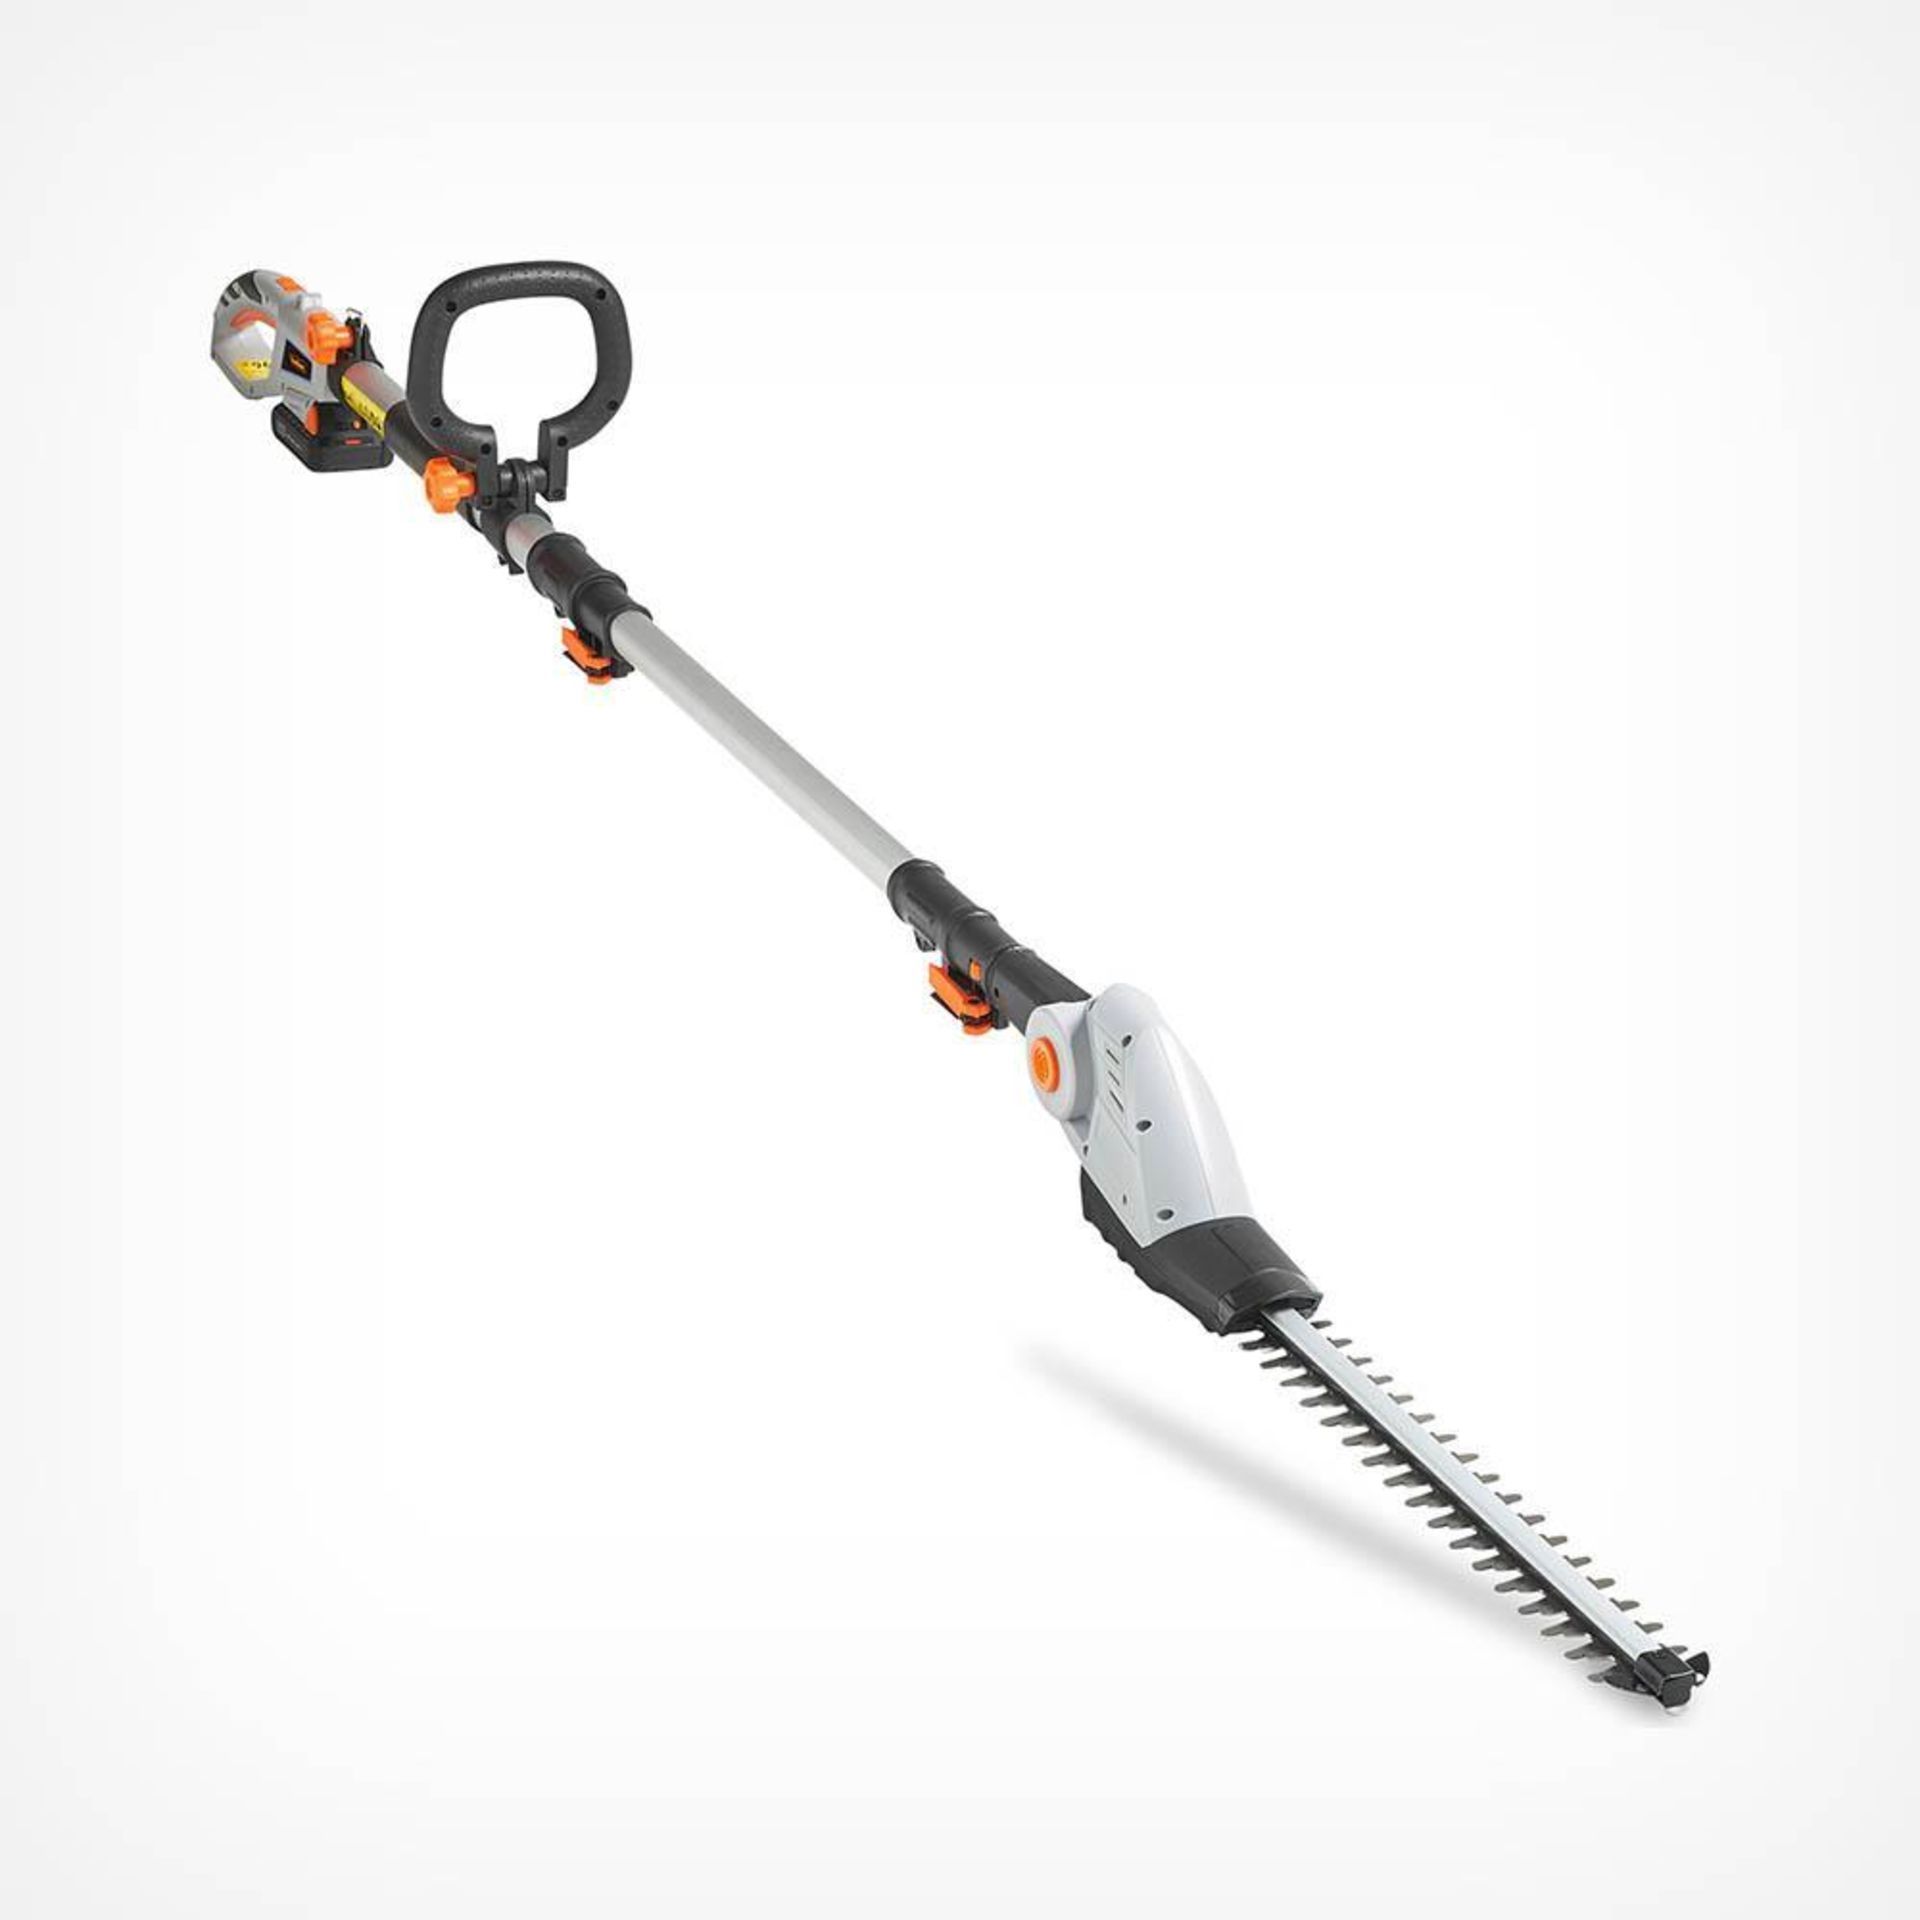 G-series Cordless Pole Trimmer. RRP £139.99. (ROW8.4). Cut hedges quickly and conveniently with